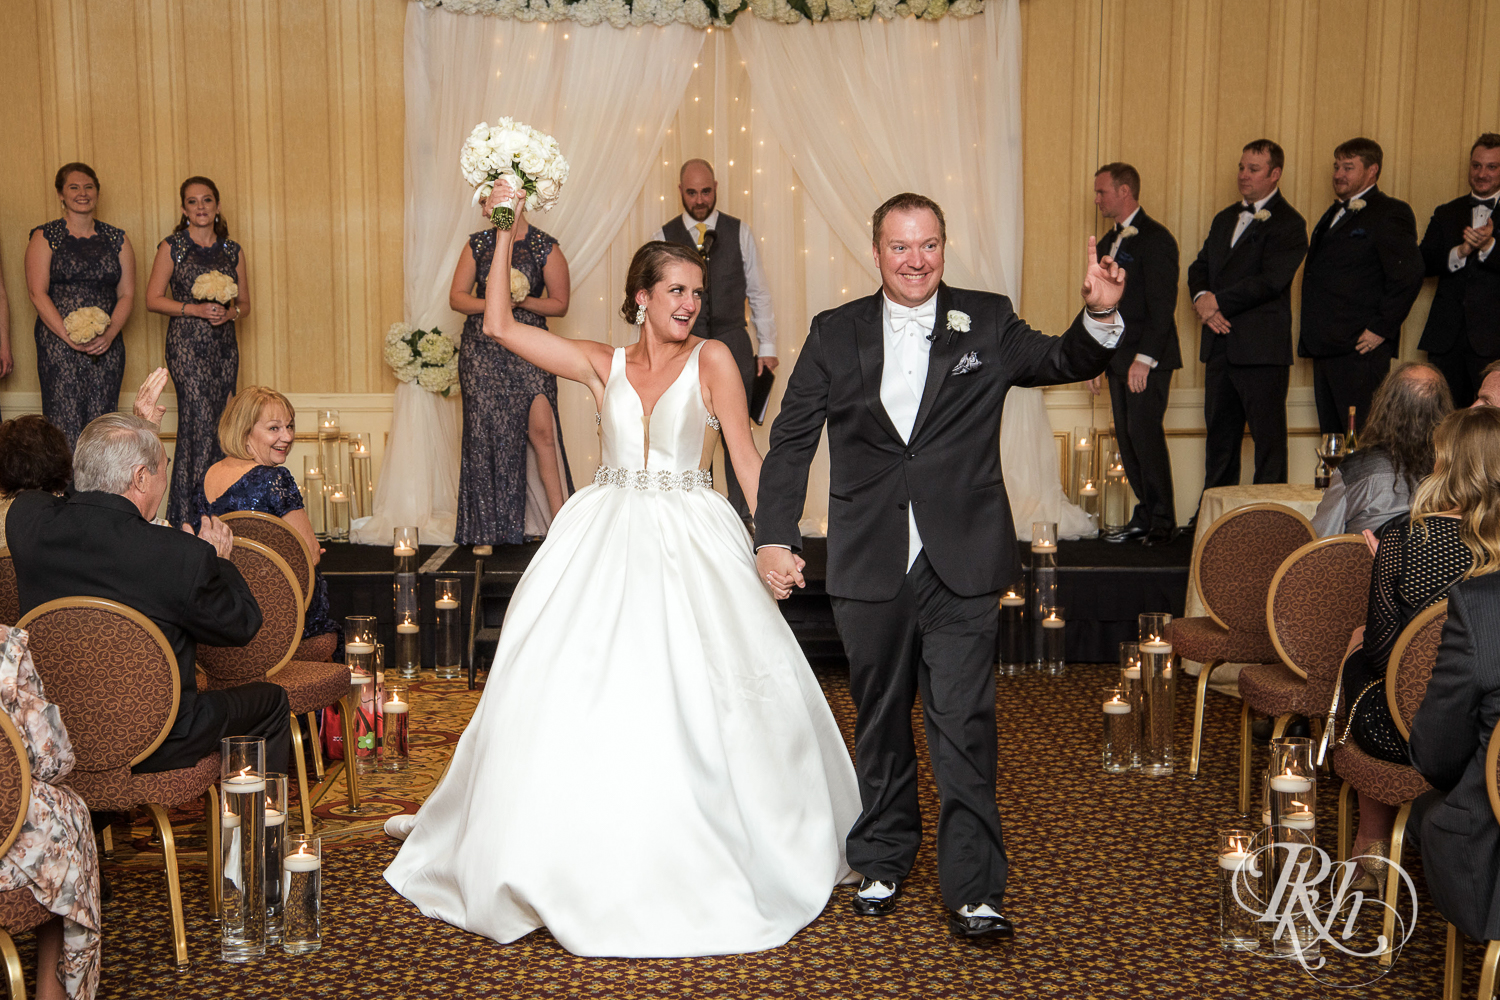 Bride and groom smile after wedding ceremony at The Saint Paul Hotel in Saint Paul, Minnesota.